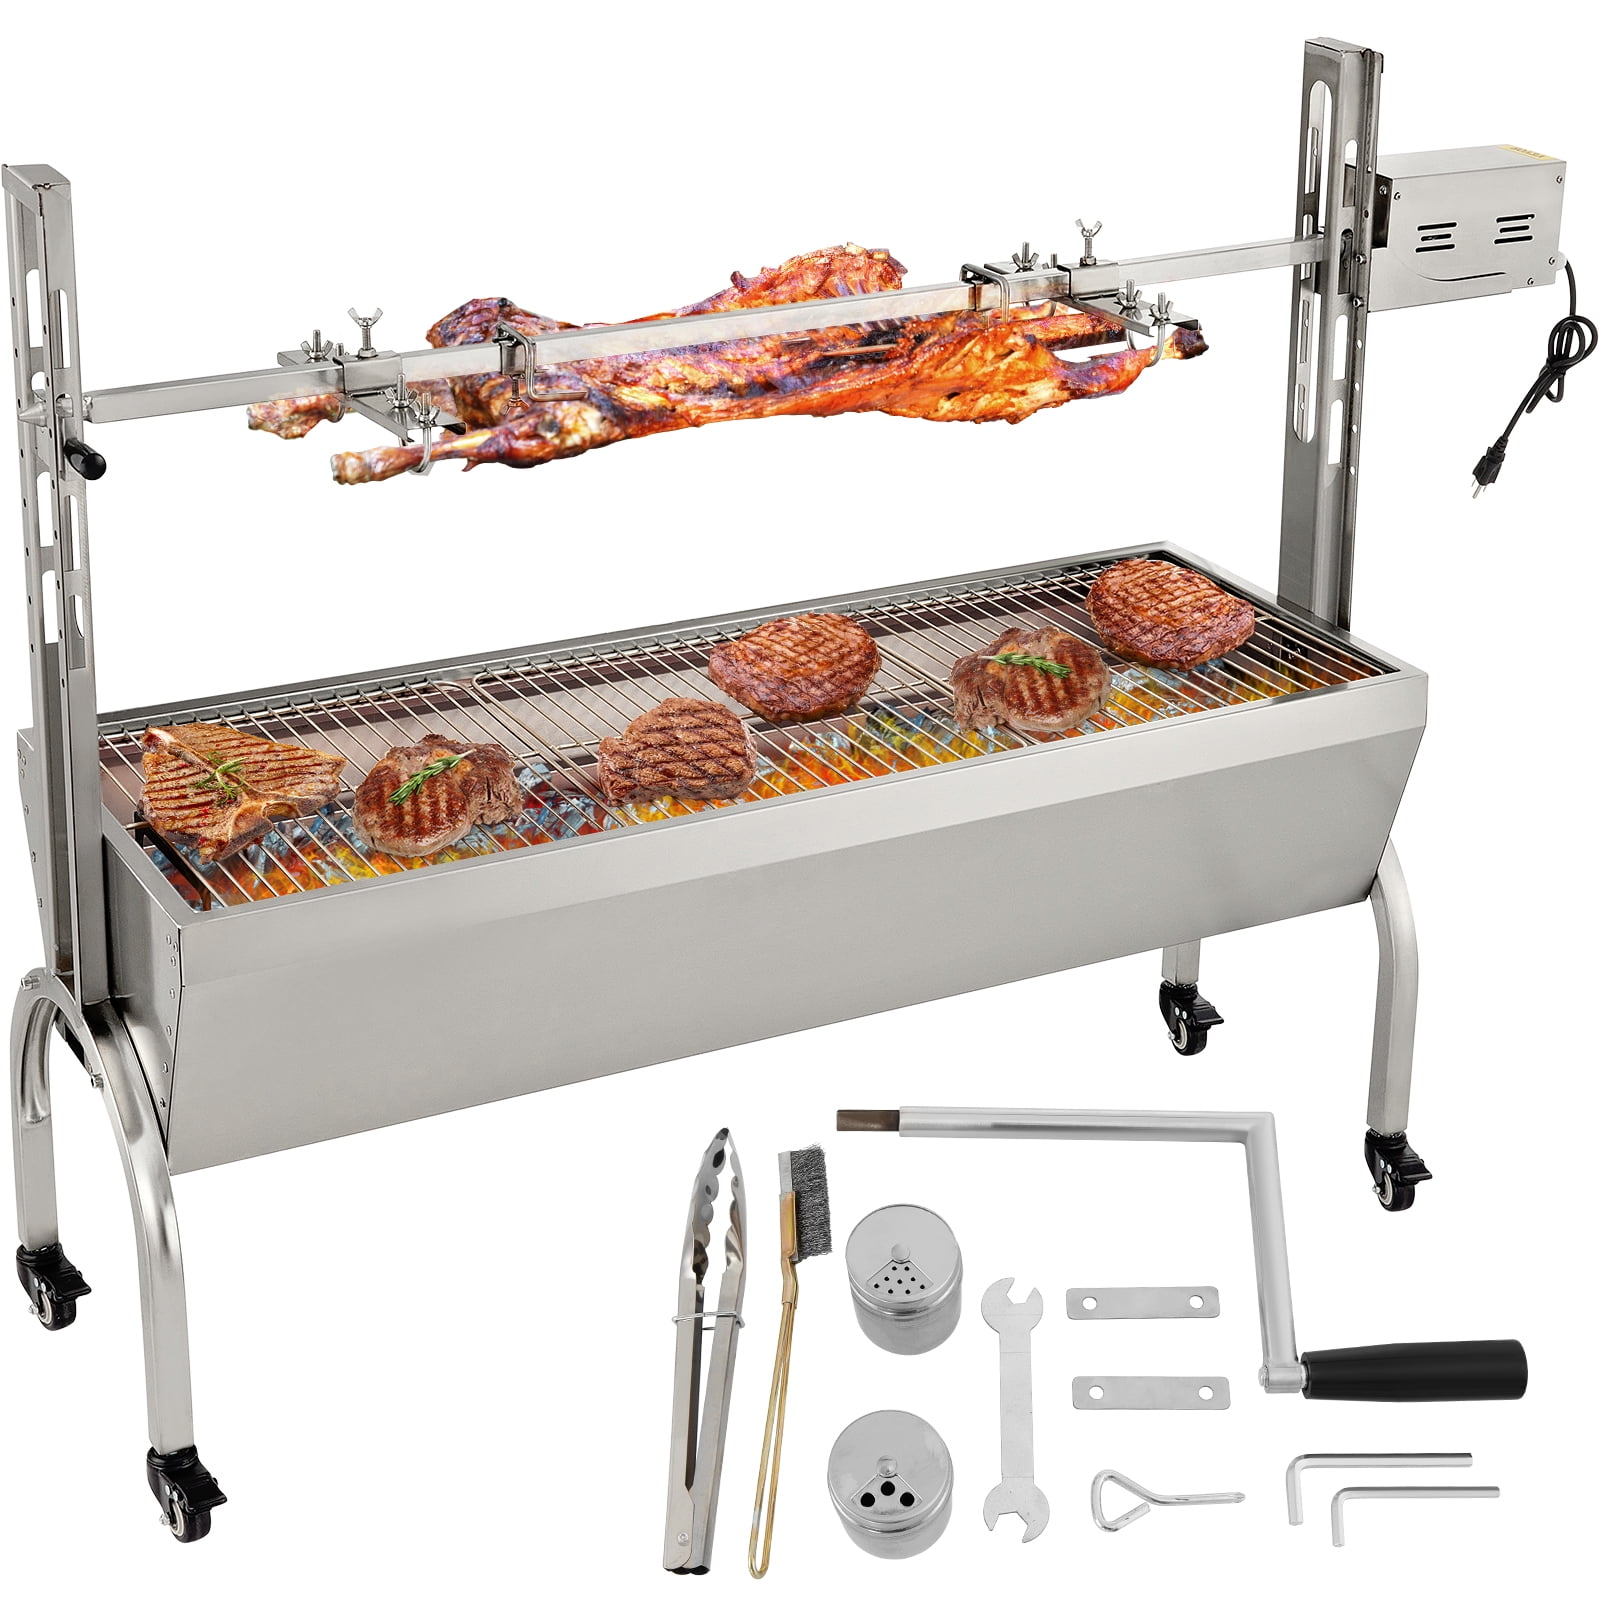 Details about   Large Grill Rotisserie Spit Roaster Rod Charcoal BBQ Pig Chicken 15W Motor Kit 